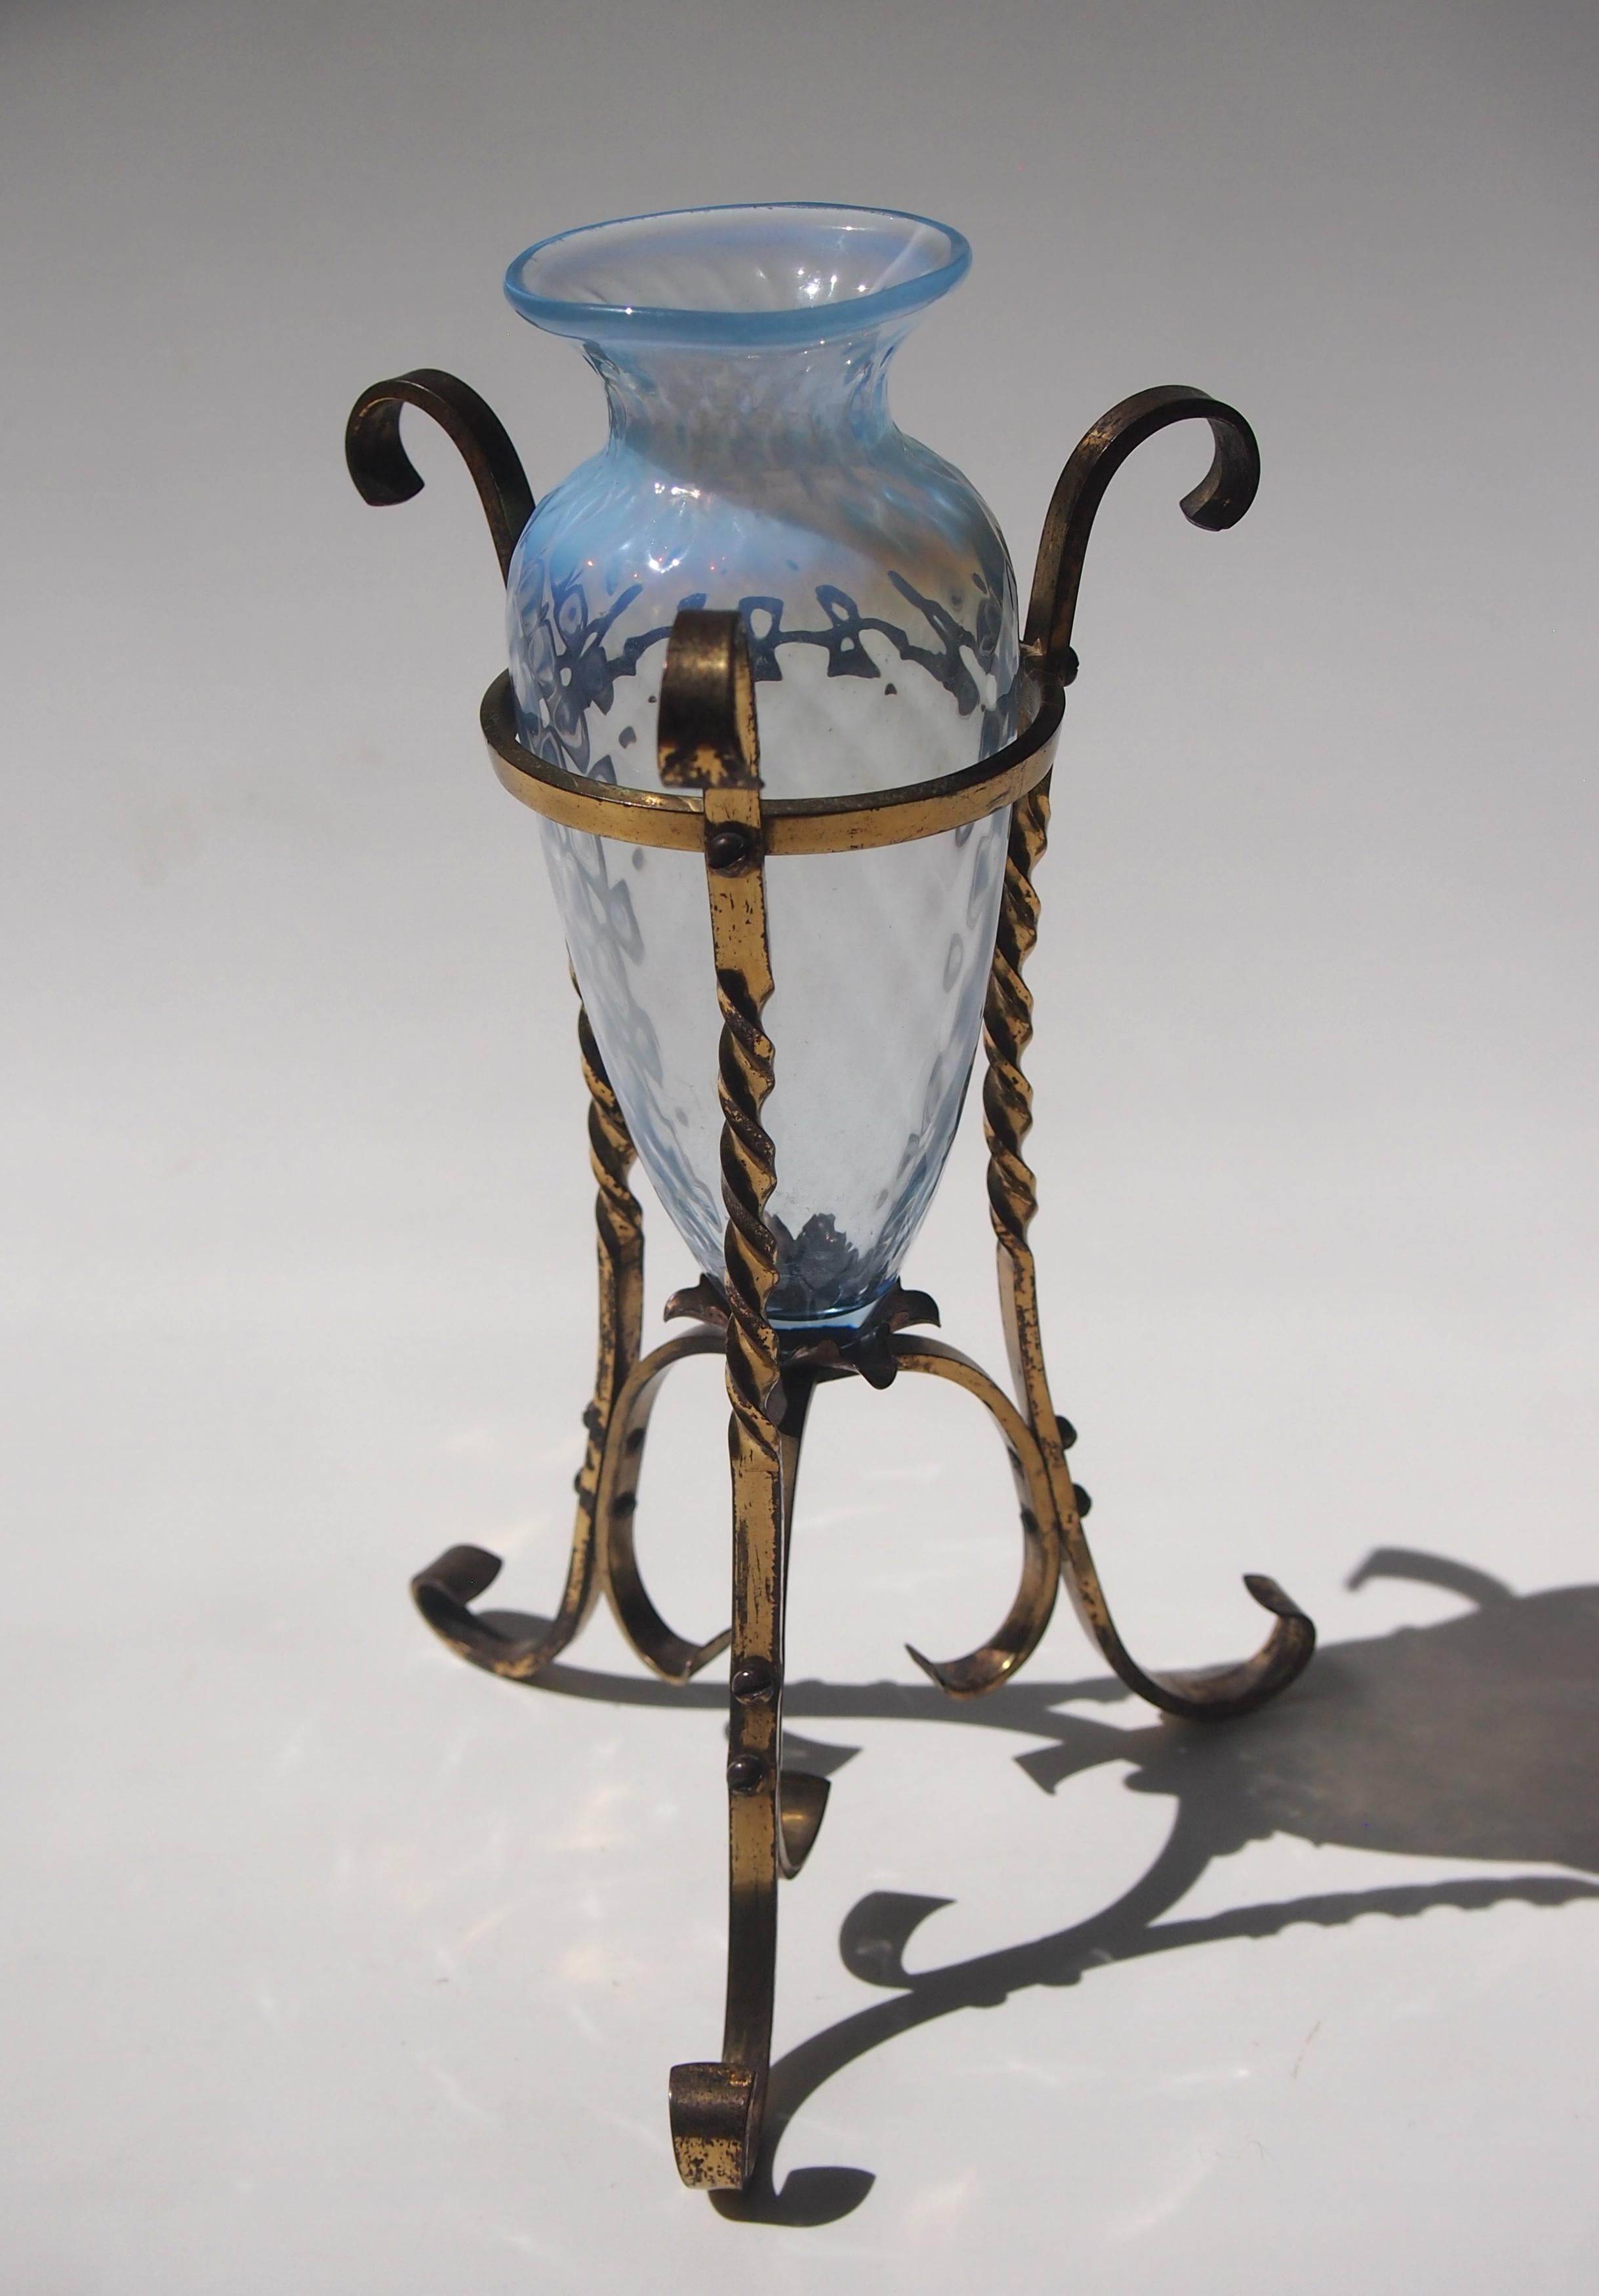 A superb Arts & Crafts blue opal urn glass vase by James Powell of London in a bronze and copper stand by W A S Benson circa 1888. The glass urn is decorated with a diamond pattern, The frame is almost all bronze with a small copper flower in the